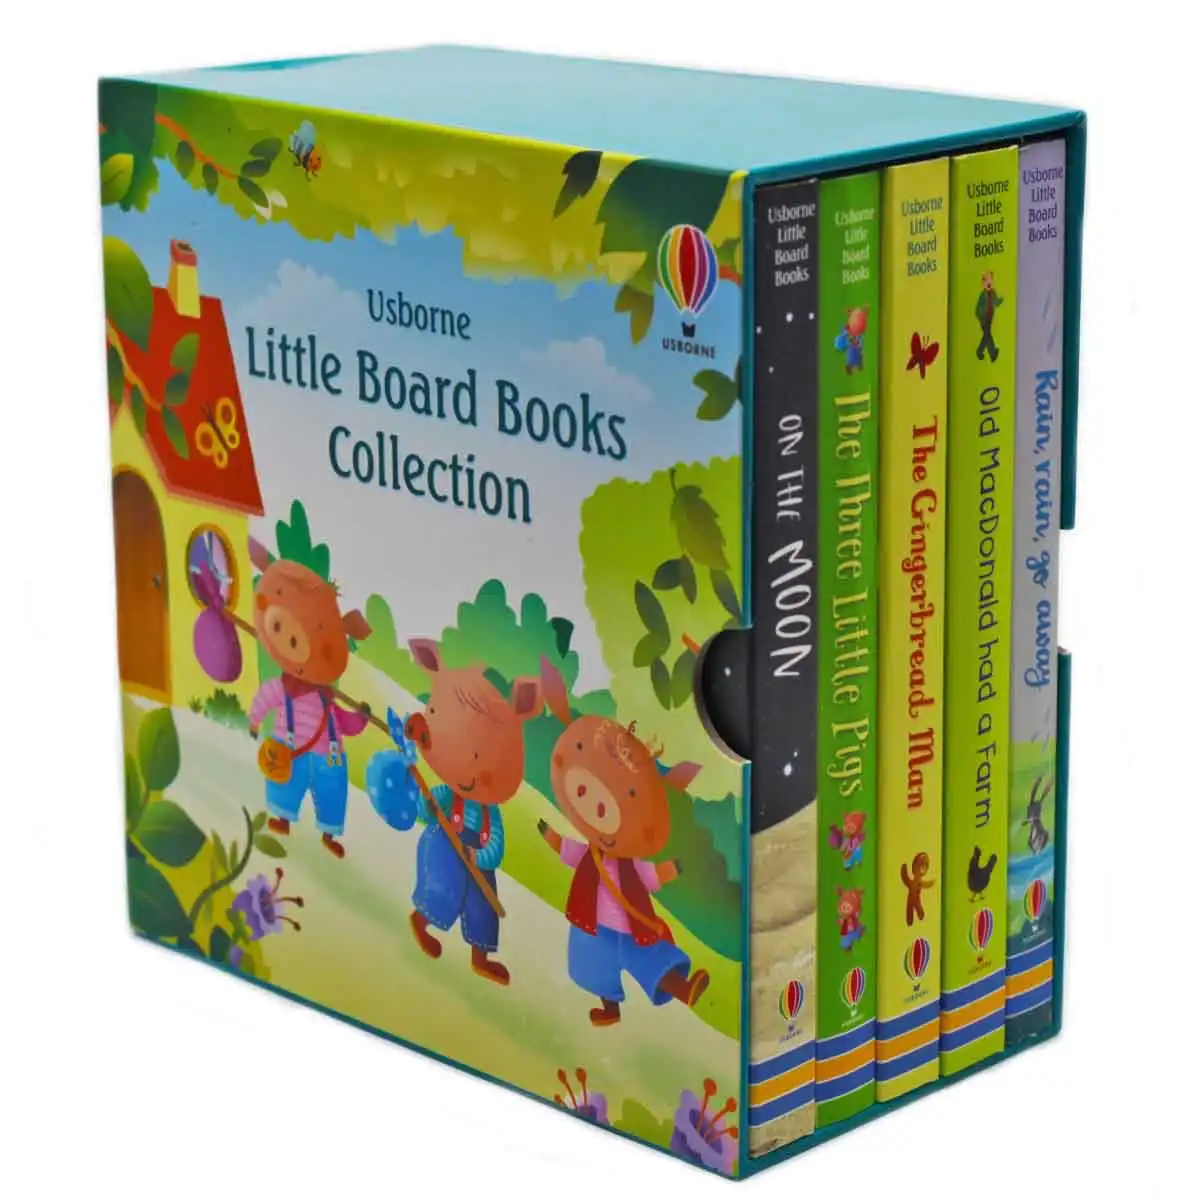 Little Board Book Collection - 5 Copy Box Set